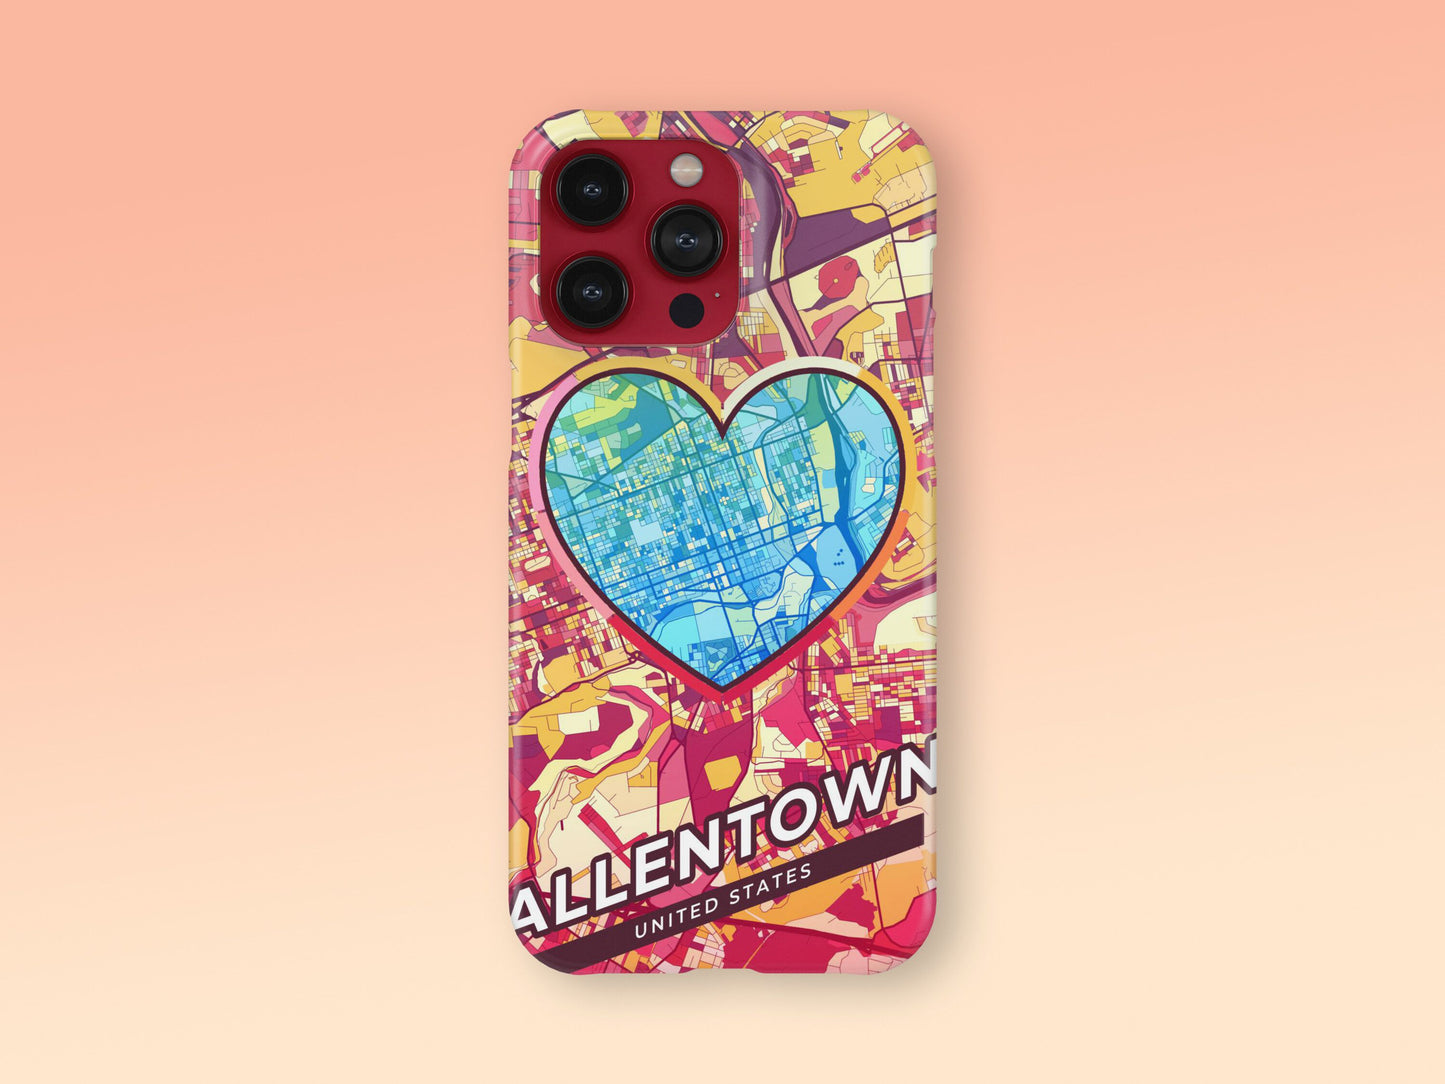 Allentown Pennsylvania slim phone case with colorful icon. Birthday, wedding or housewarming gift. Couple match cases. 2